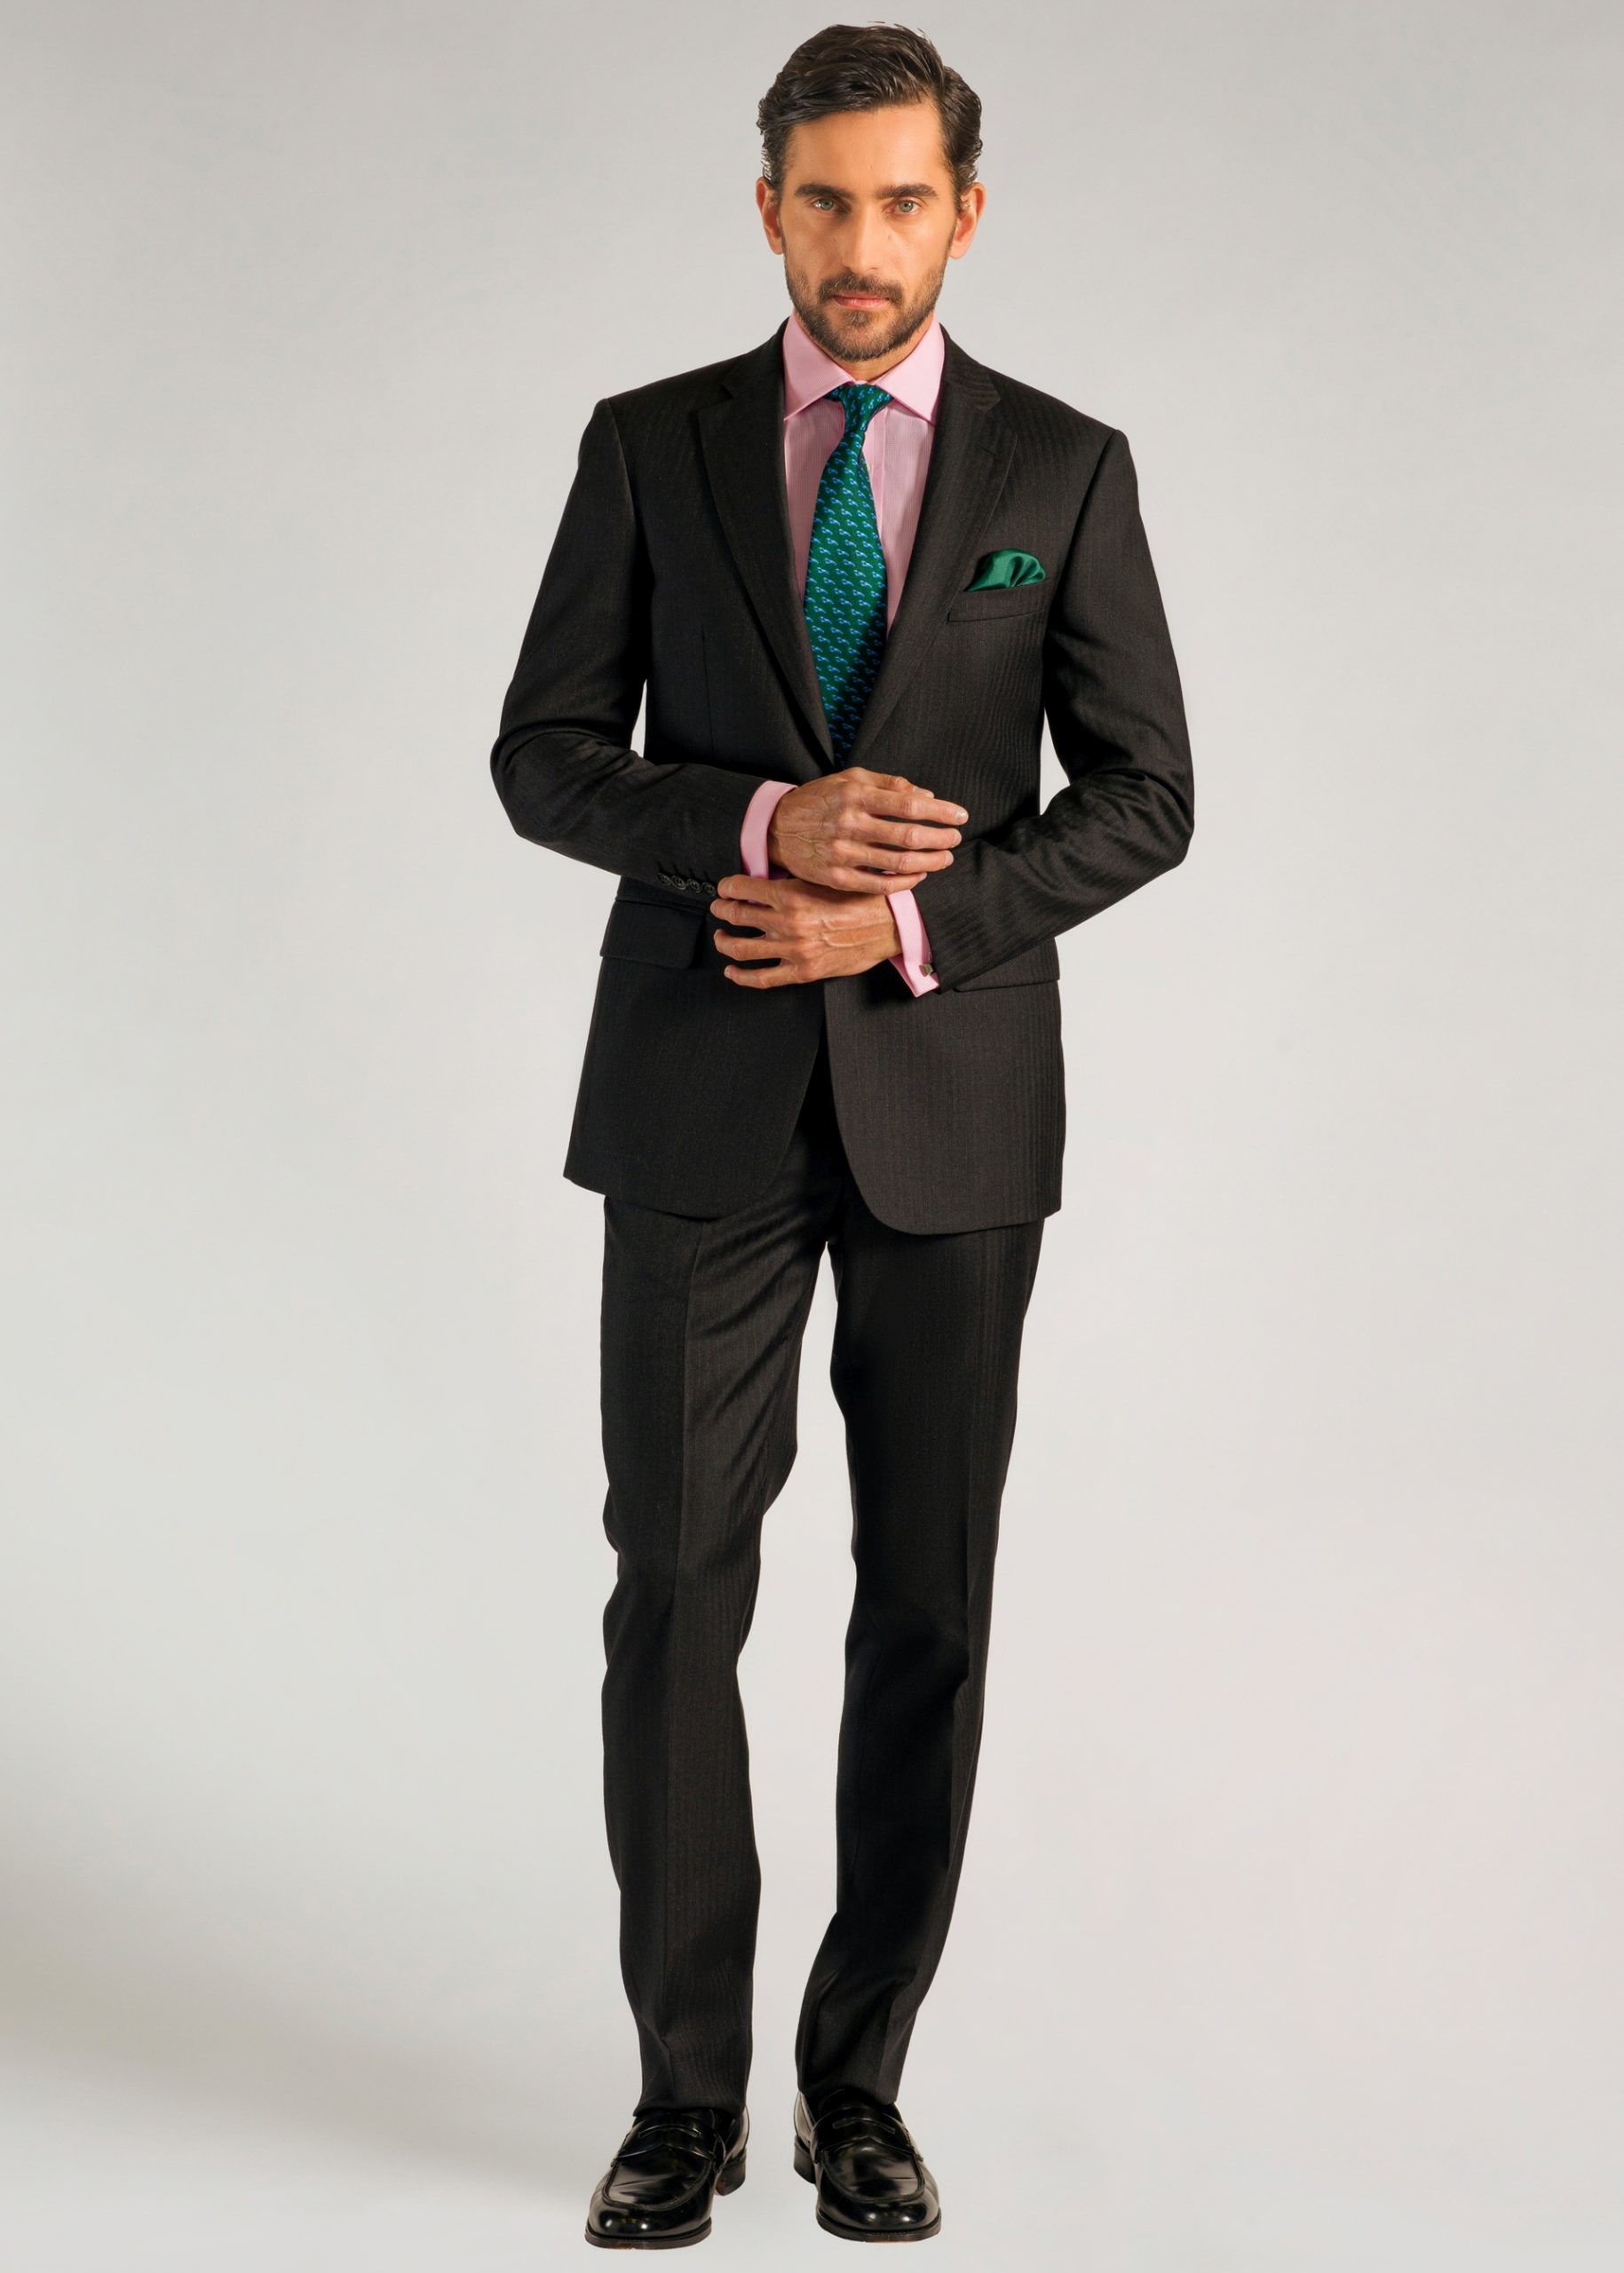 Roderick Charles grey herringbone suit styled with pink shirt and green tie